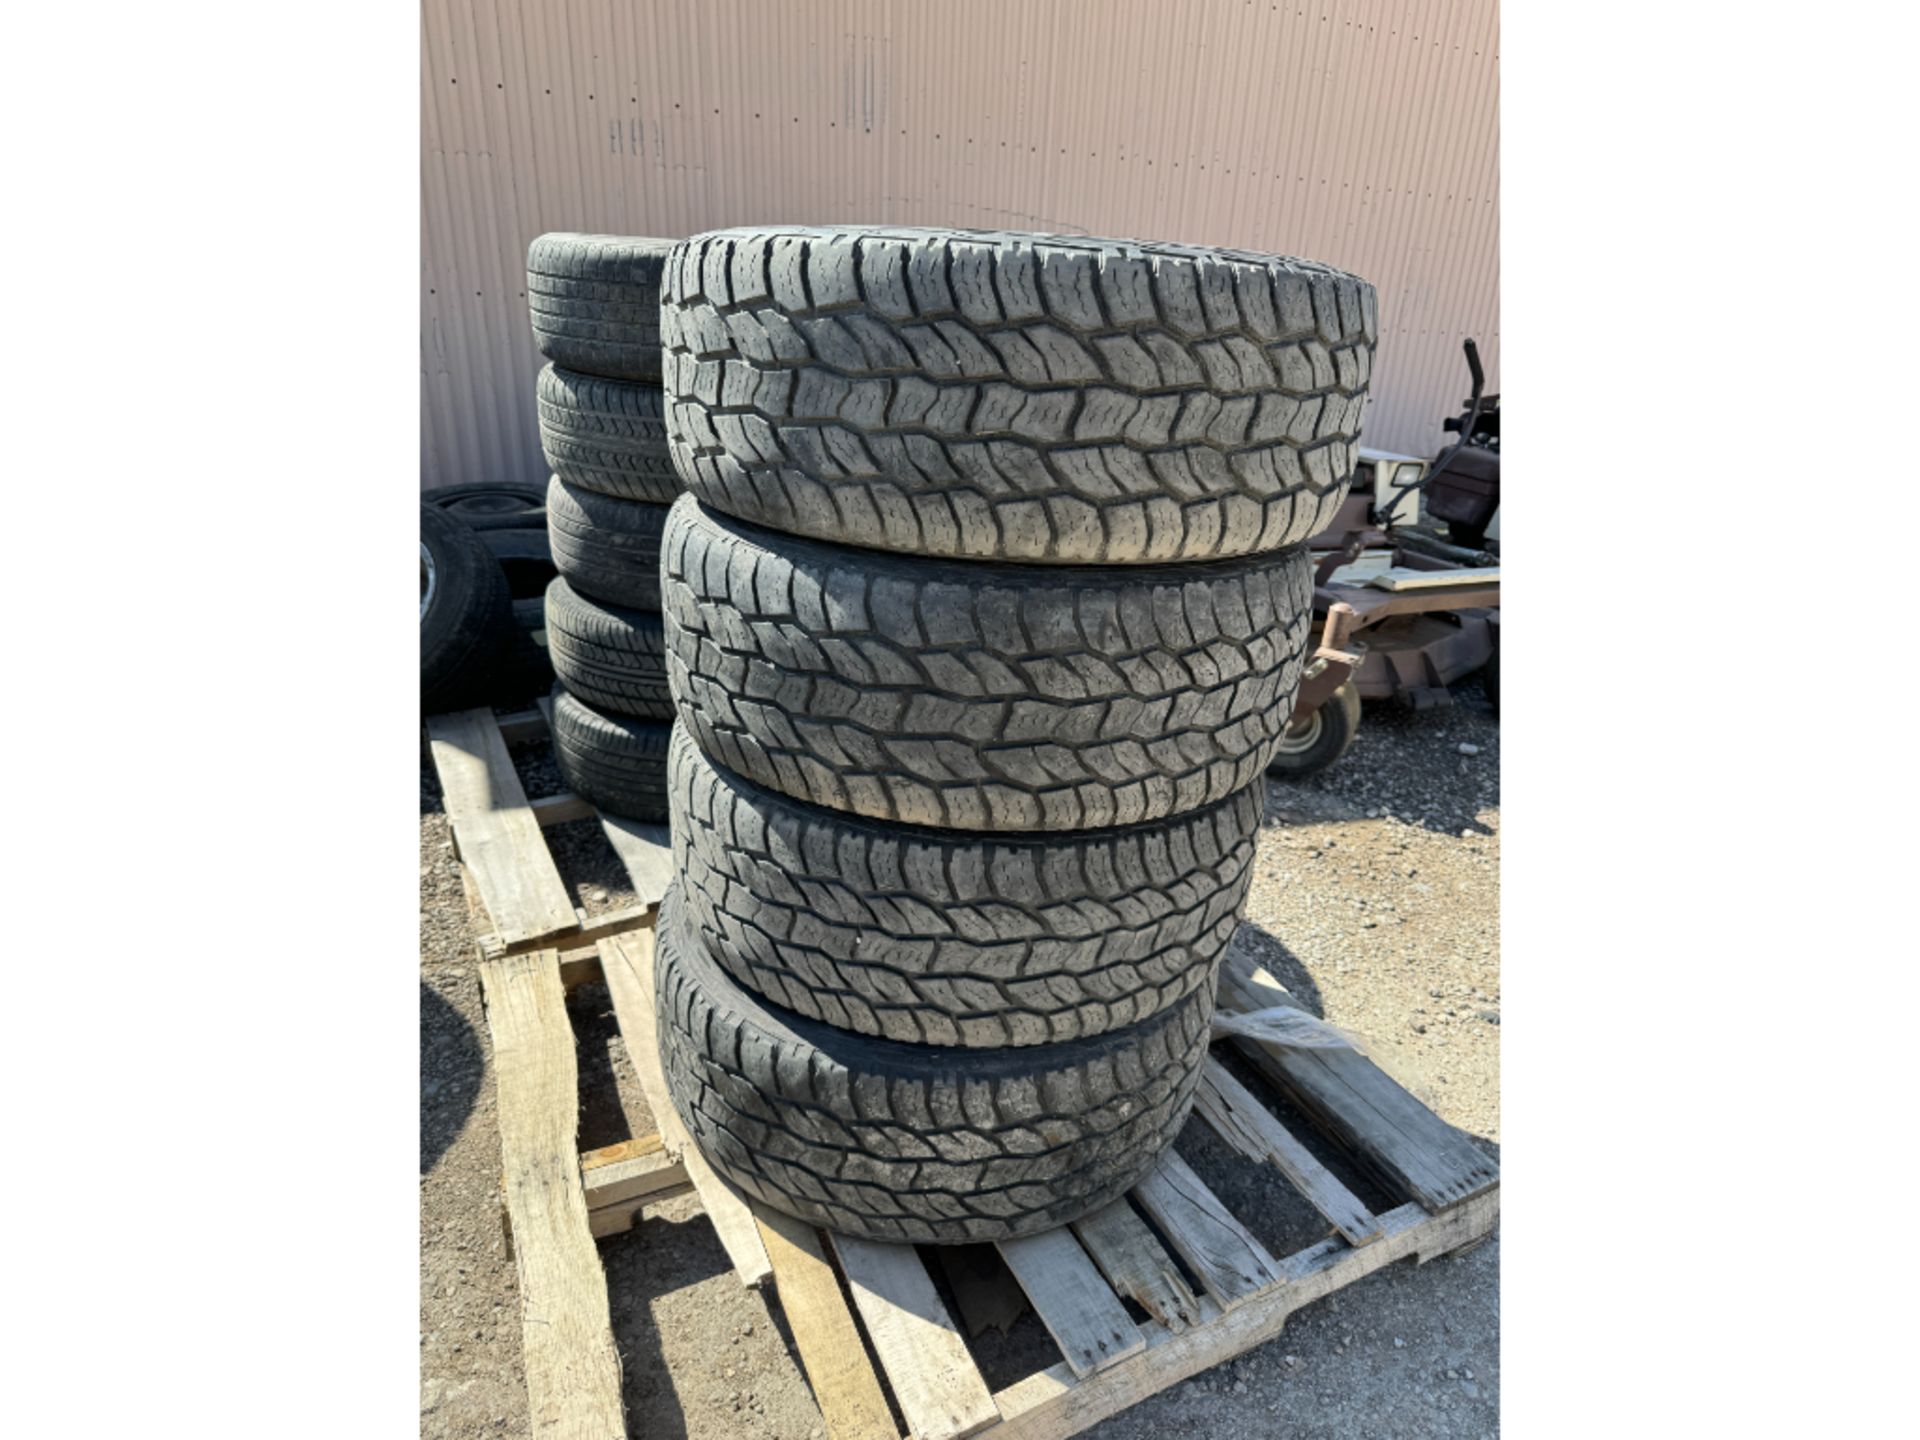 4 Discover Cooper 275/55R20 Tires - Image 5 of 5